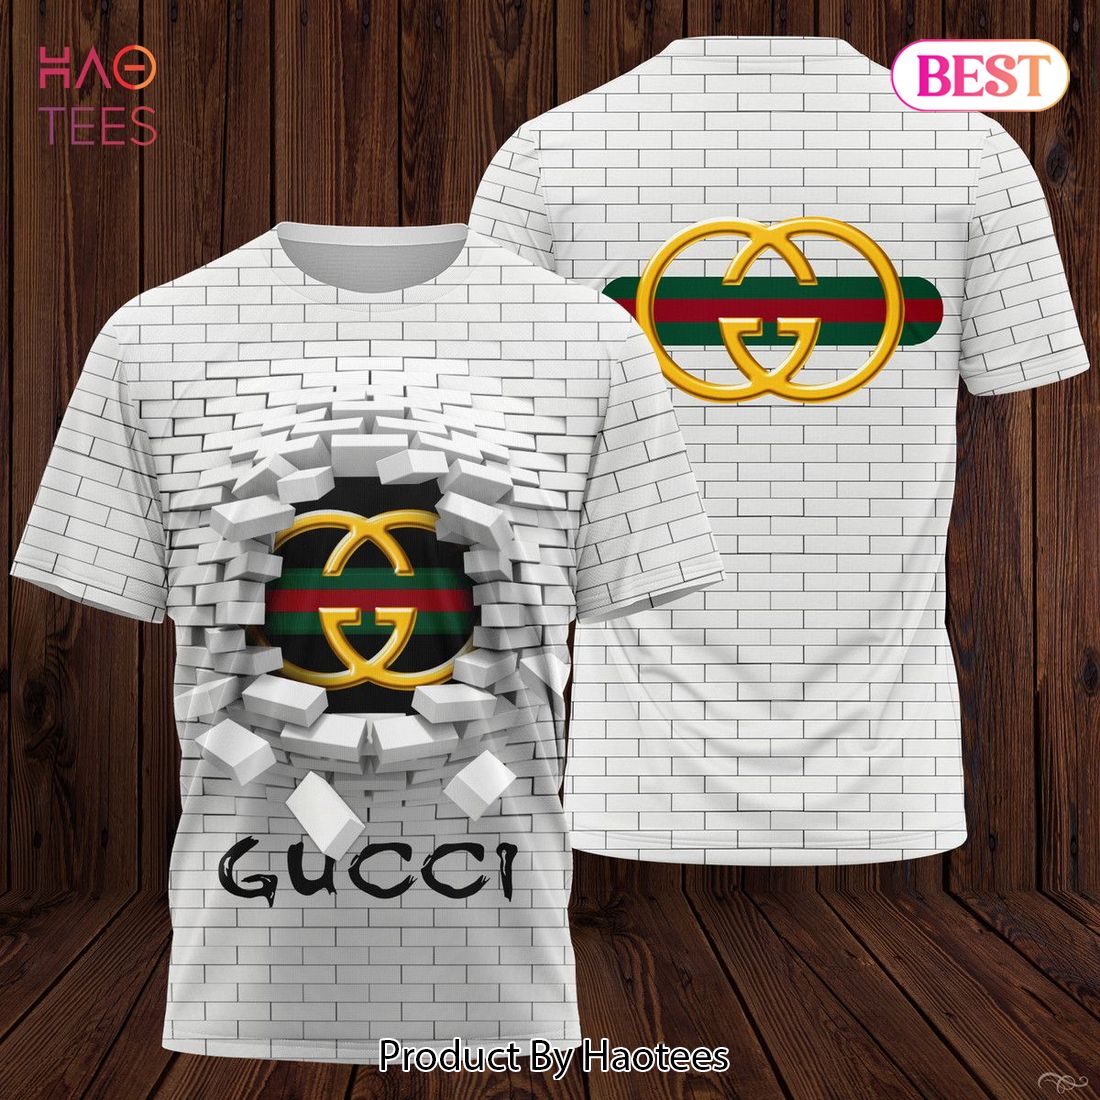 THE BEST Gucci Luxury Brand White Color Full Printing 3D T-Shirt Limited Edition